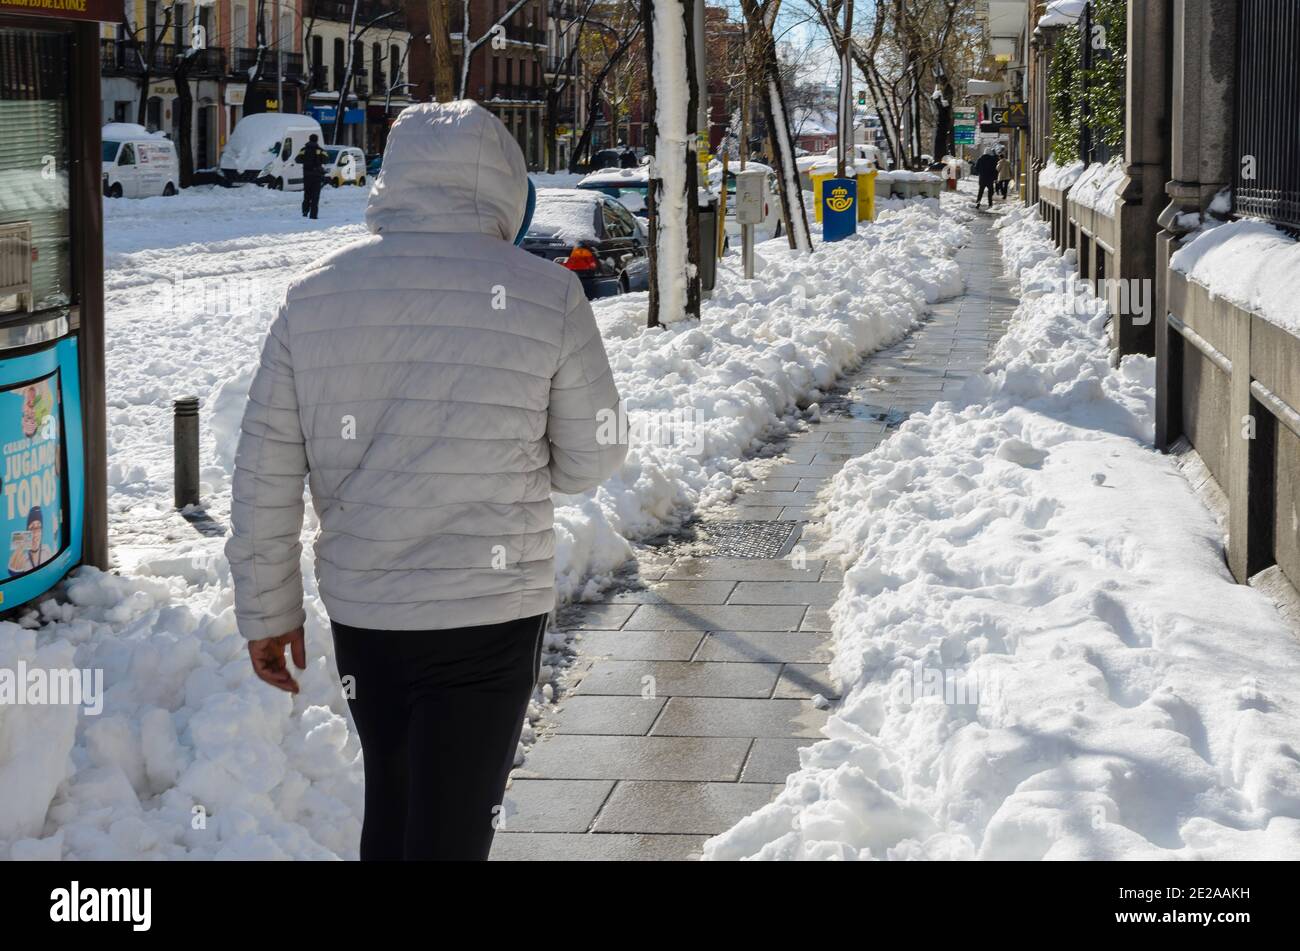 Madrid, Spain. 10 th January 2021. View of a man in San Bernardo street after storm snow. Credit: Enrique Davó. Stock Photo